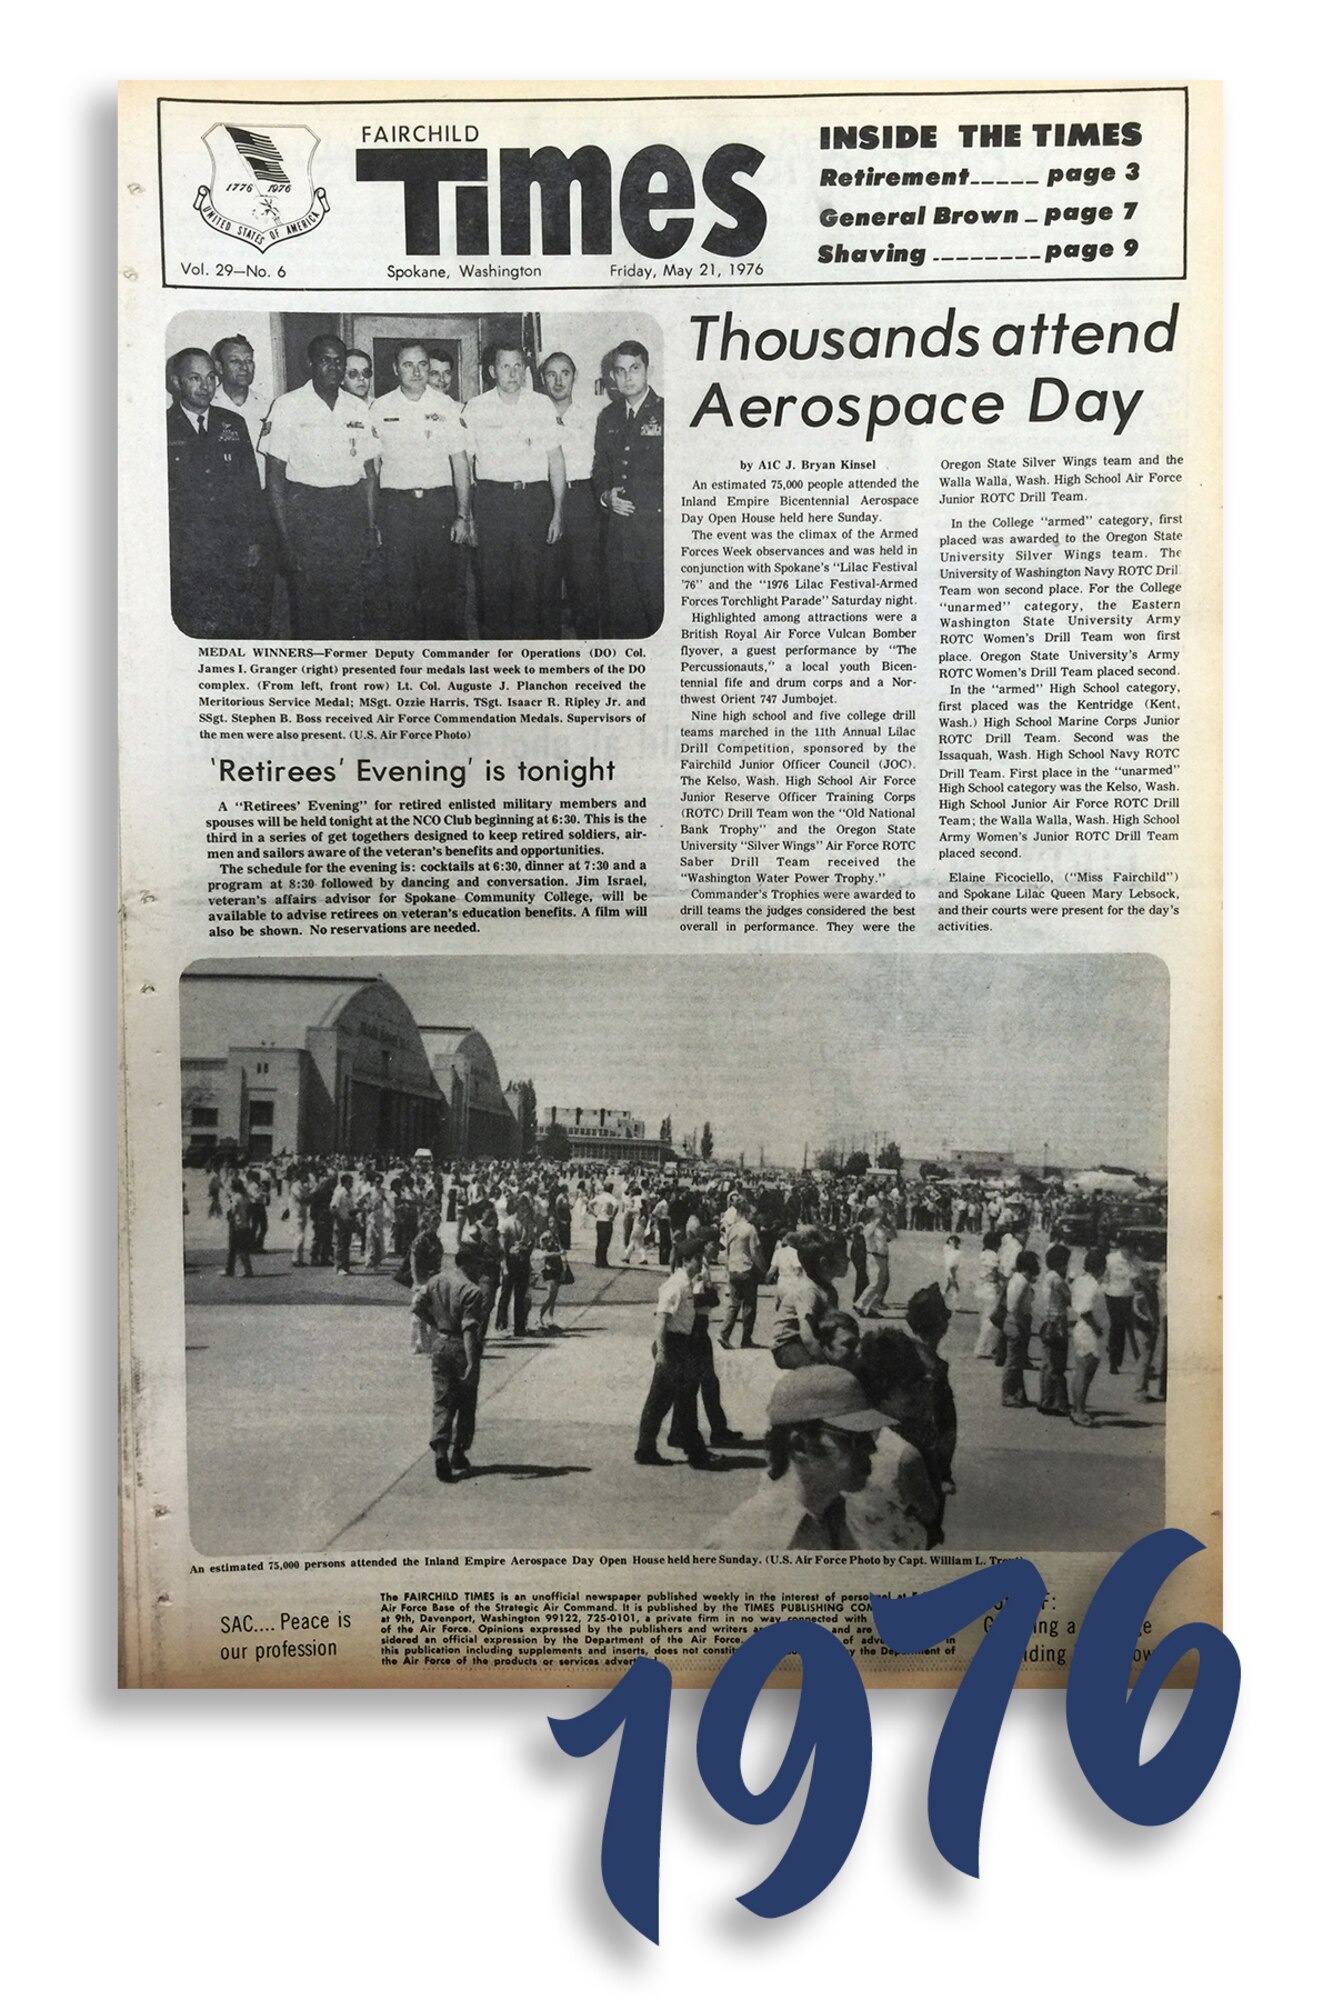 Fairchild Times, Vol. 29 - No. 6, published Friday, May 21, 1976. "Thousands attend Aerospace Day."